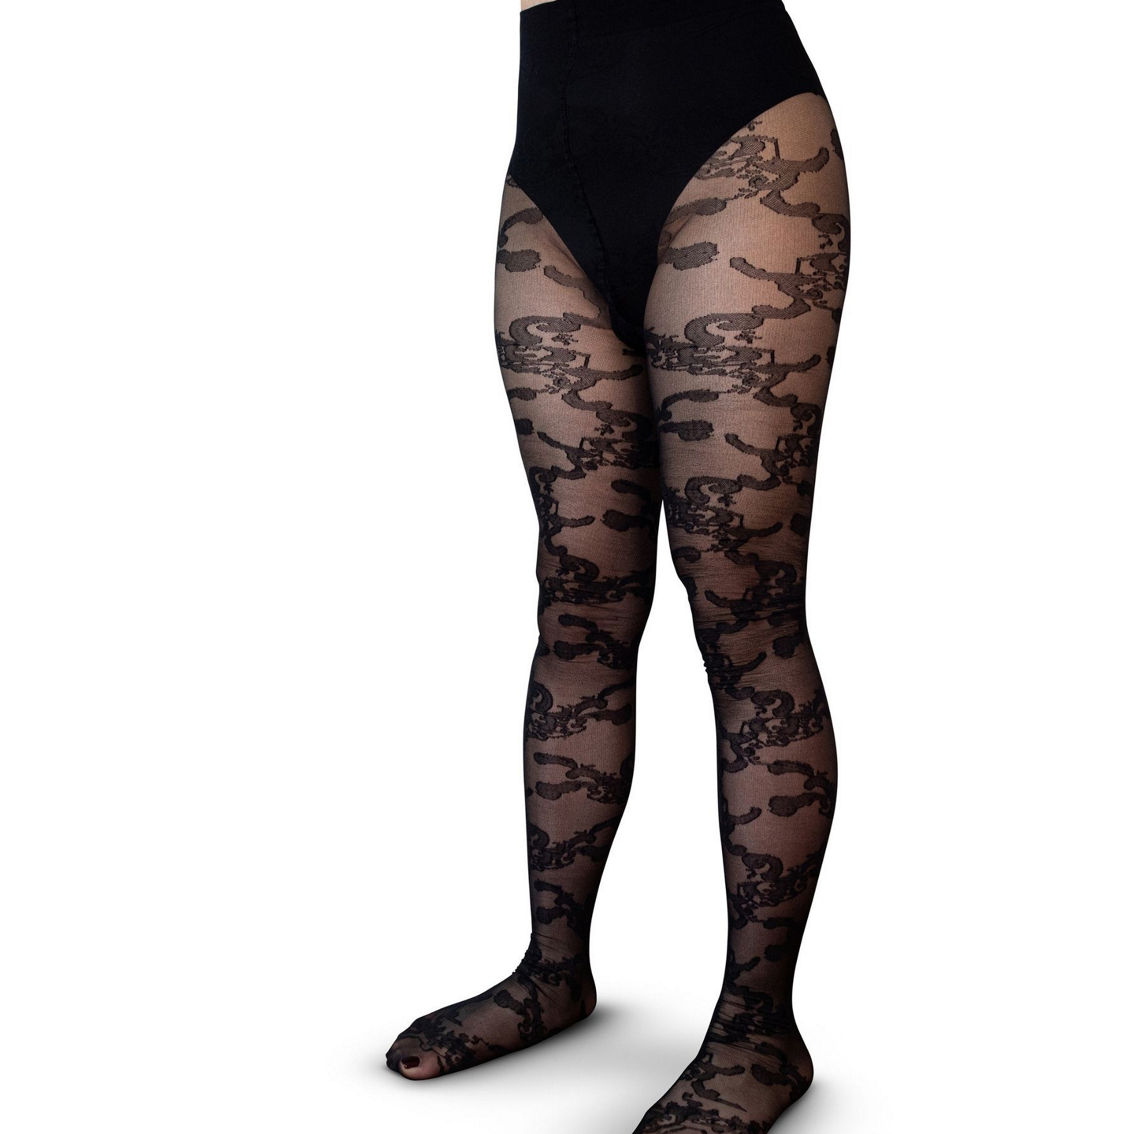 LECHERY Lace Print Tights - Image 3 of 4